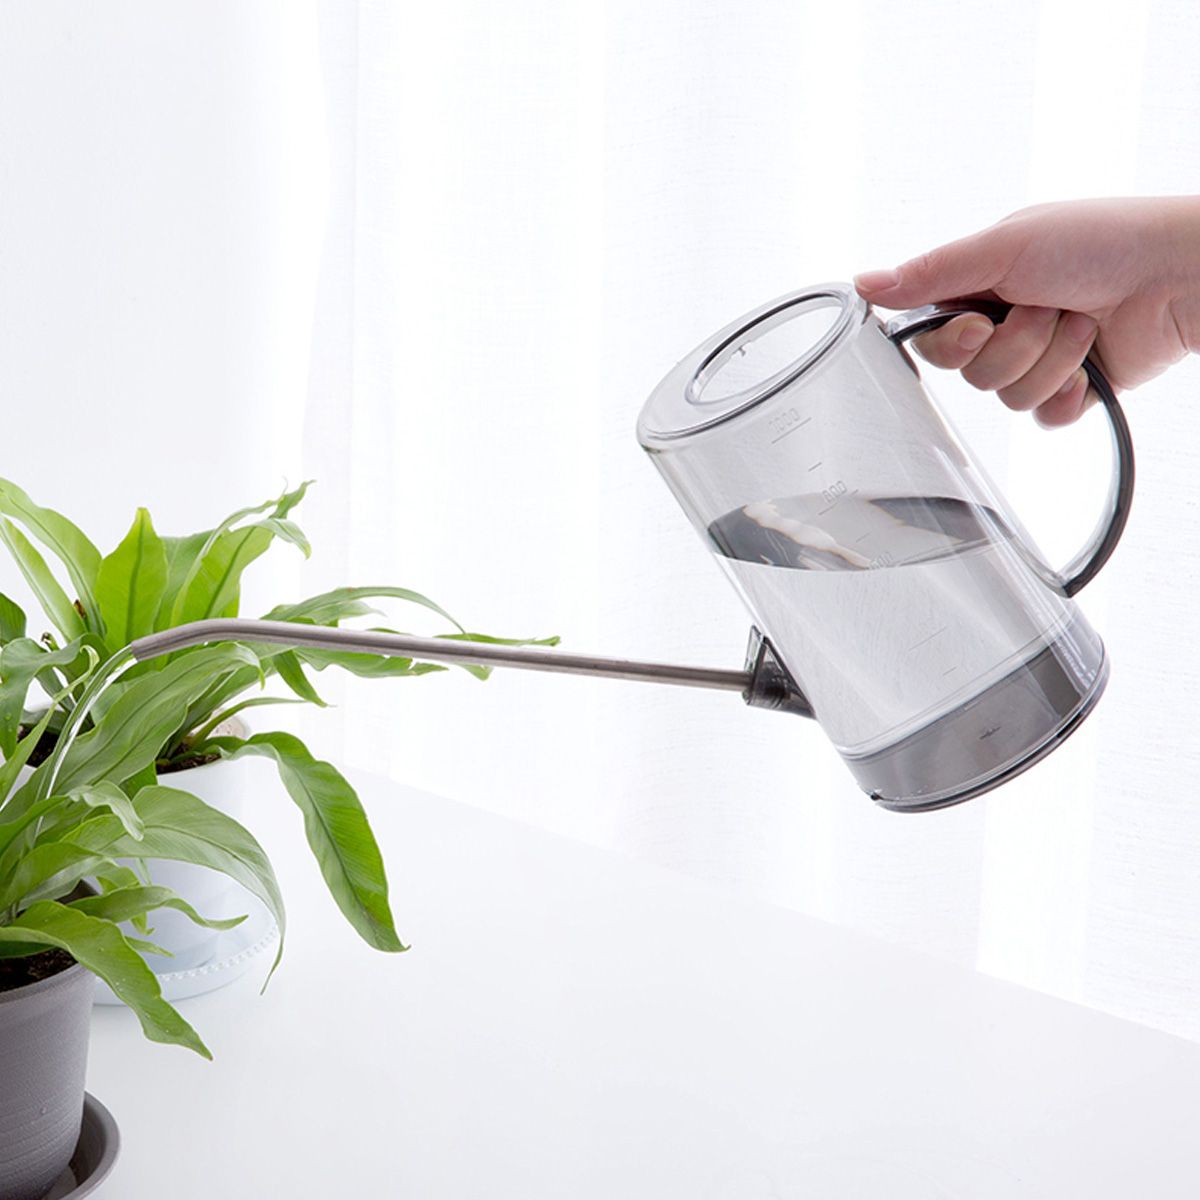 1L-Watering-Pot--Long-Mouth-Bottle-Stainless-Steel-Tube-Garden-Spout-Plant-Tool-1725294